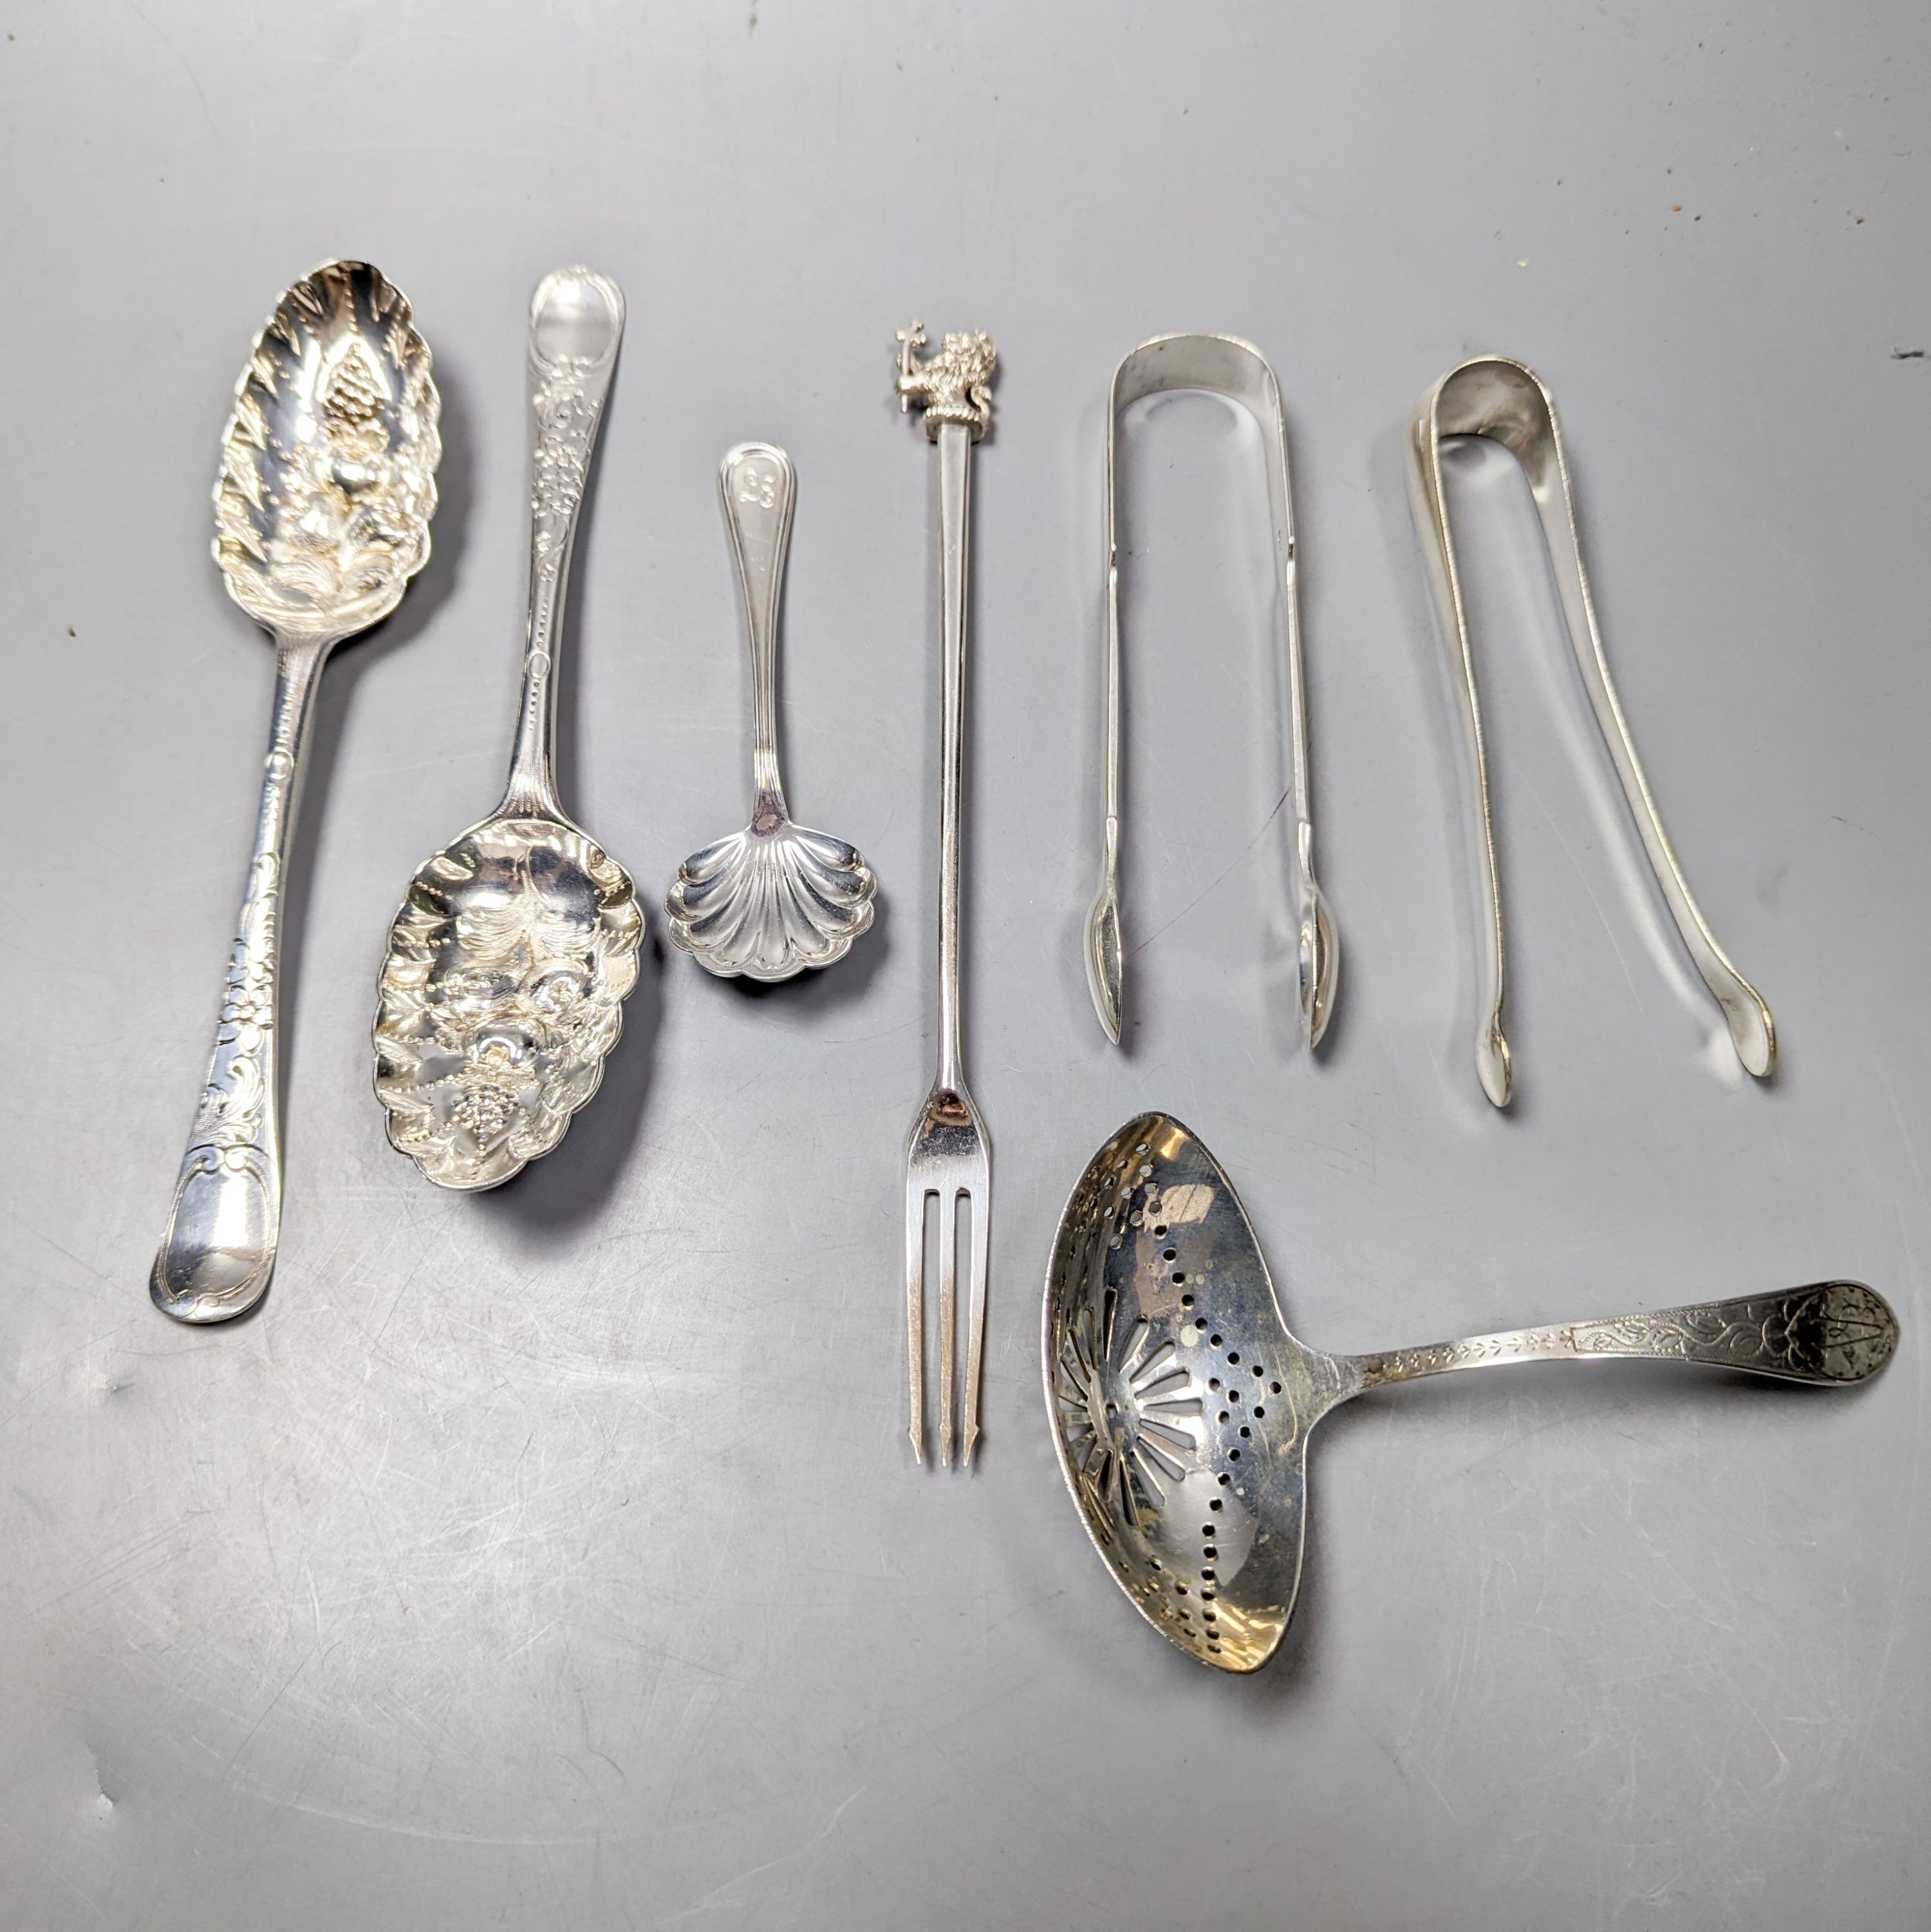 A pair of 18th century silver base mark 'berry spoons', marks pinched and sundry flatware including a Victorian silver pickle fork, a pair of silver sugar tongs, two 800 items of flatware and a pair Christofle plated sug